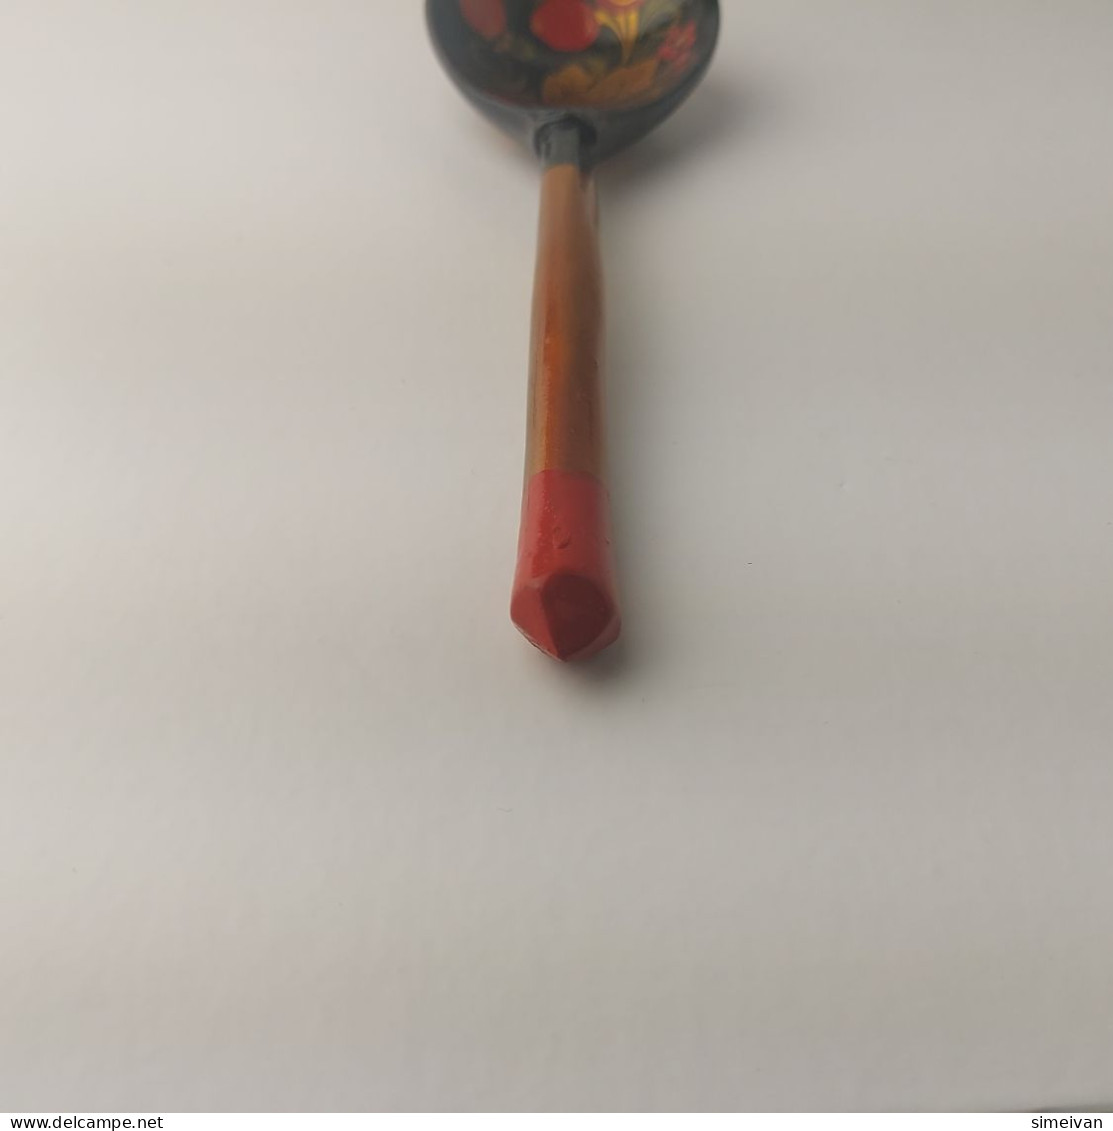 Vintage Khokhloma Wooden Spoon. Hand Painted in Russia Russian Art  #5510